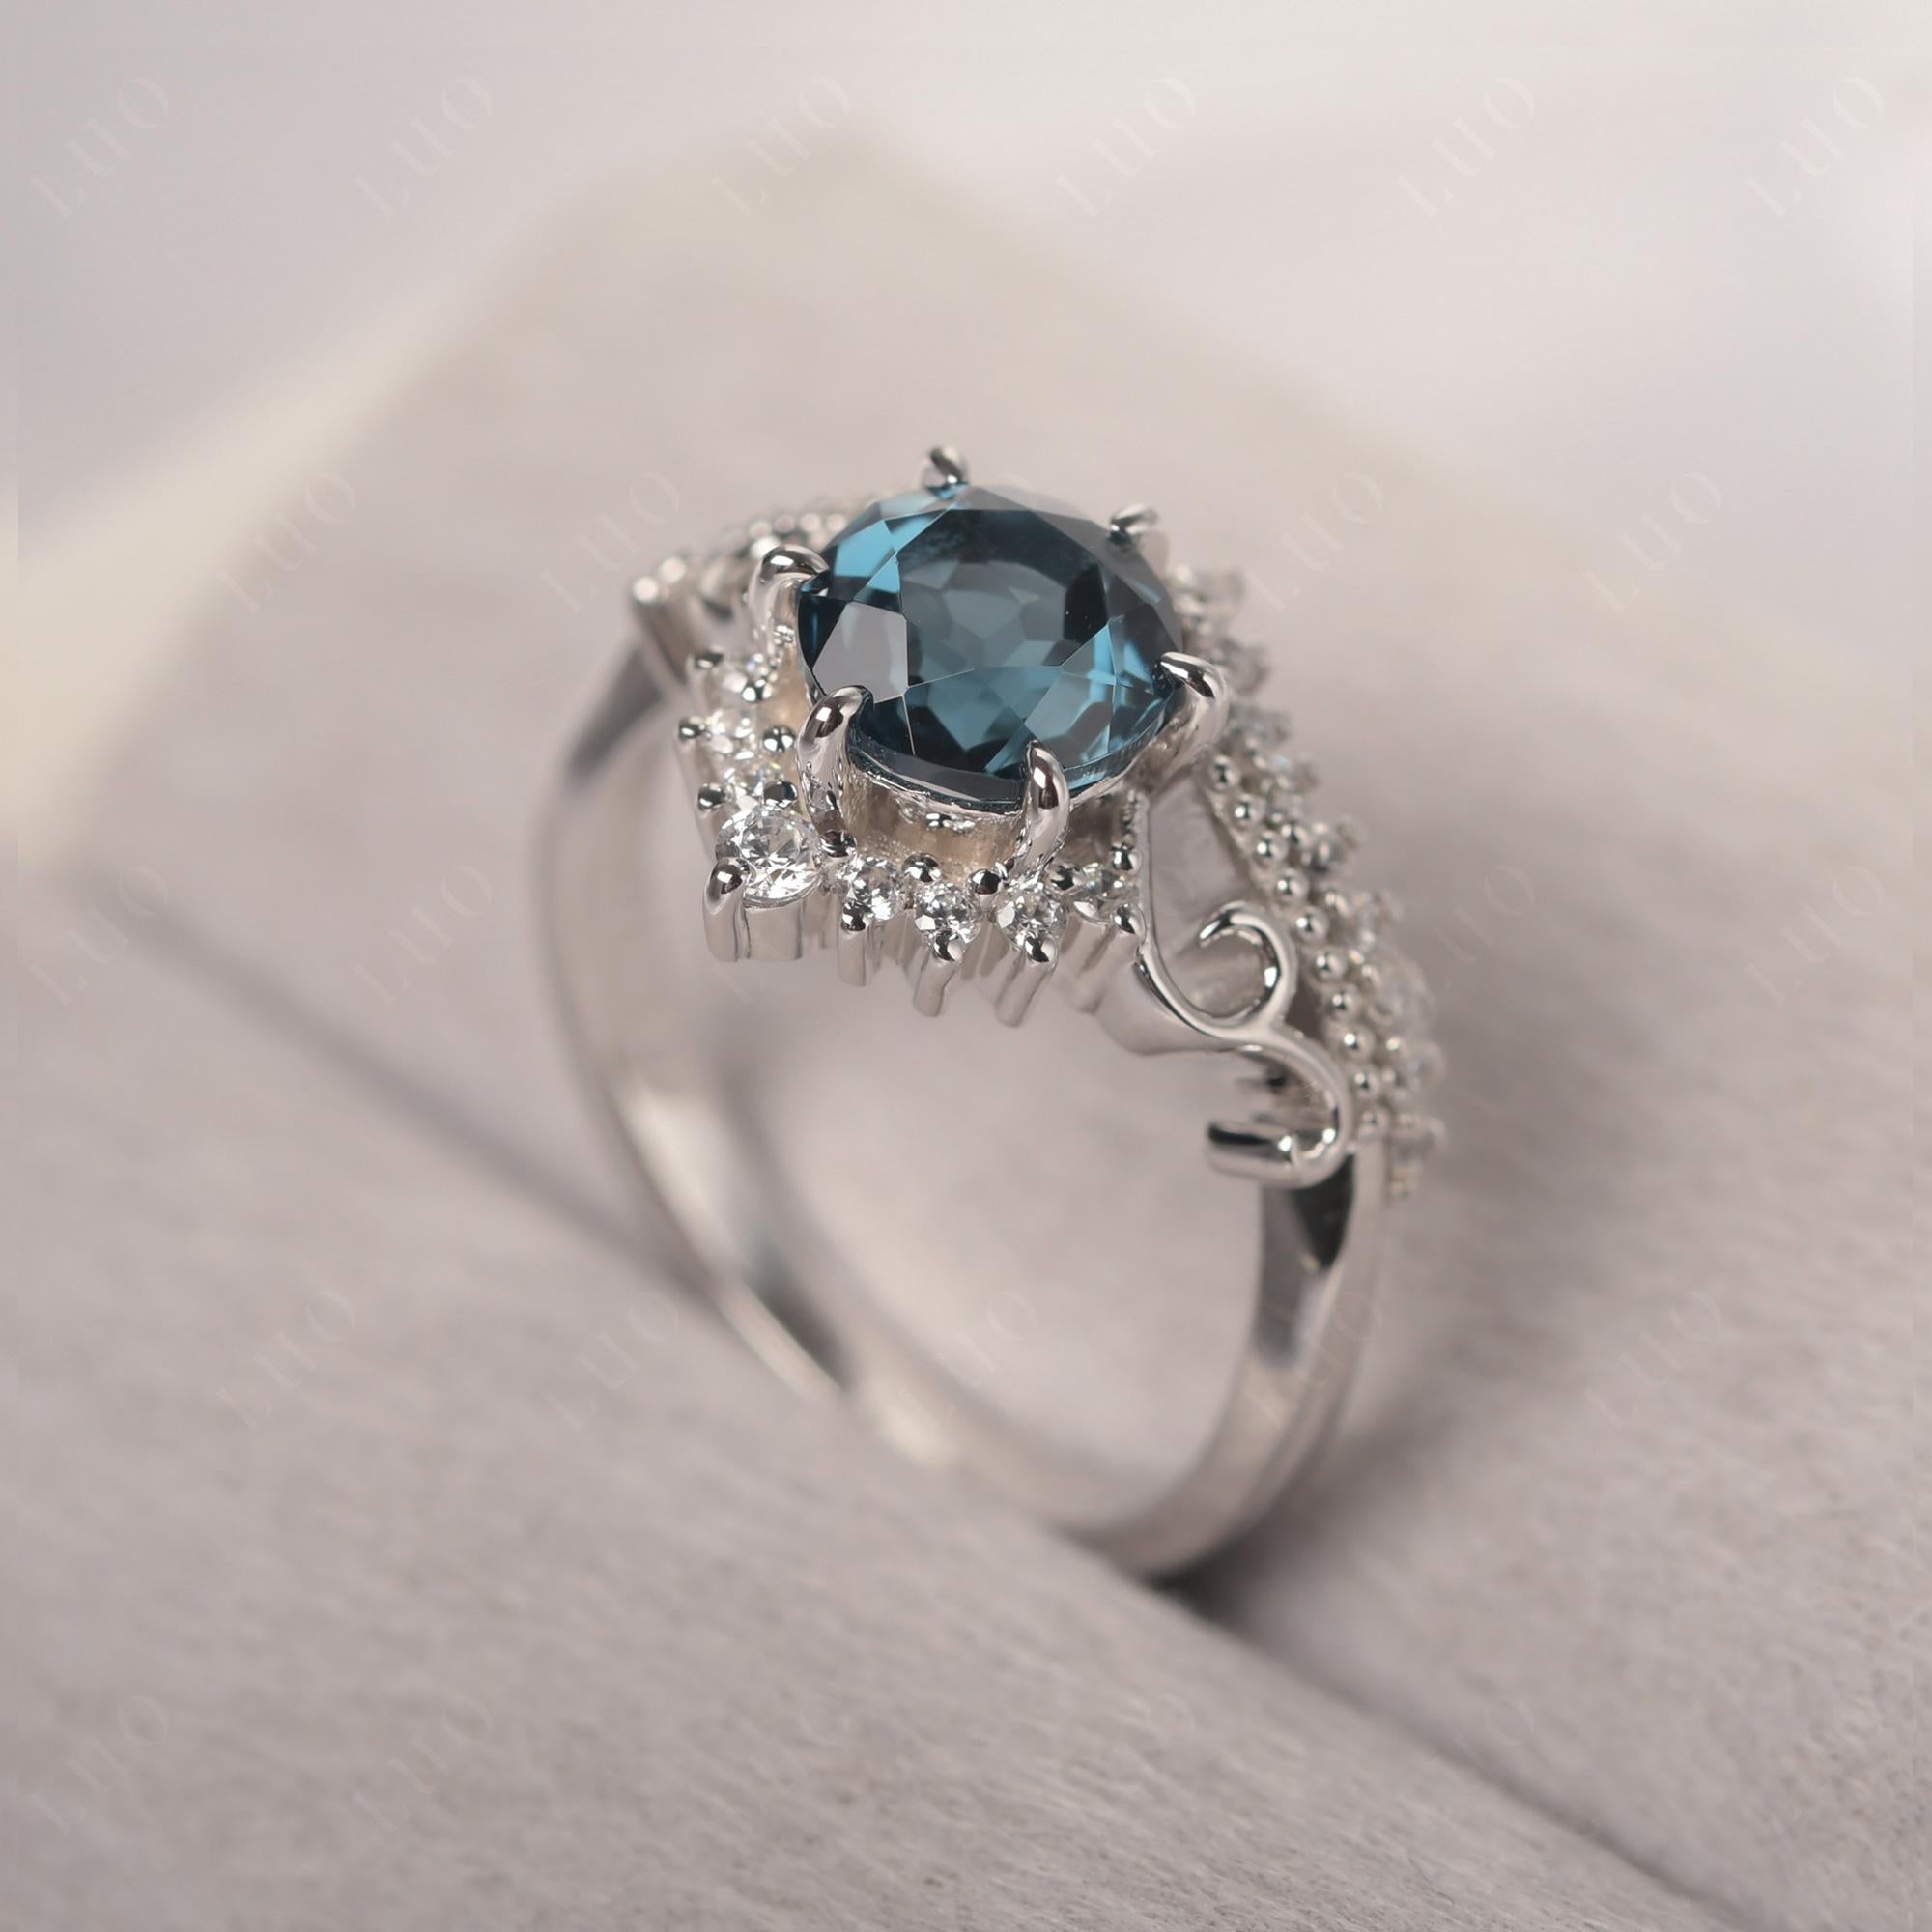 Vintage London Blue Topaz Cocktail Ring - LUO Jewelry